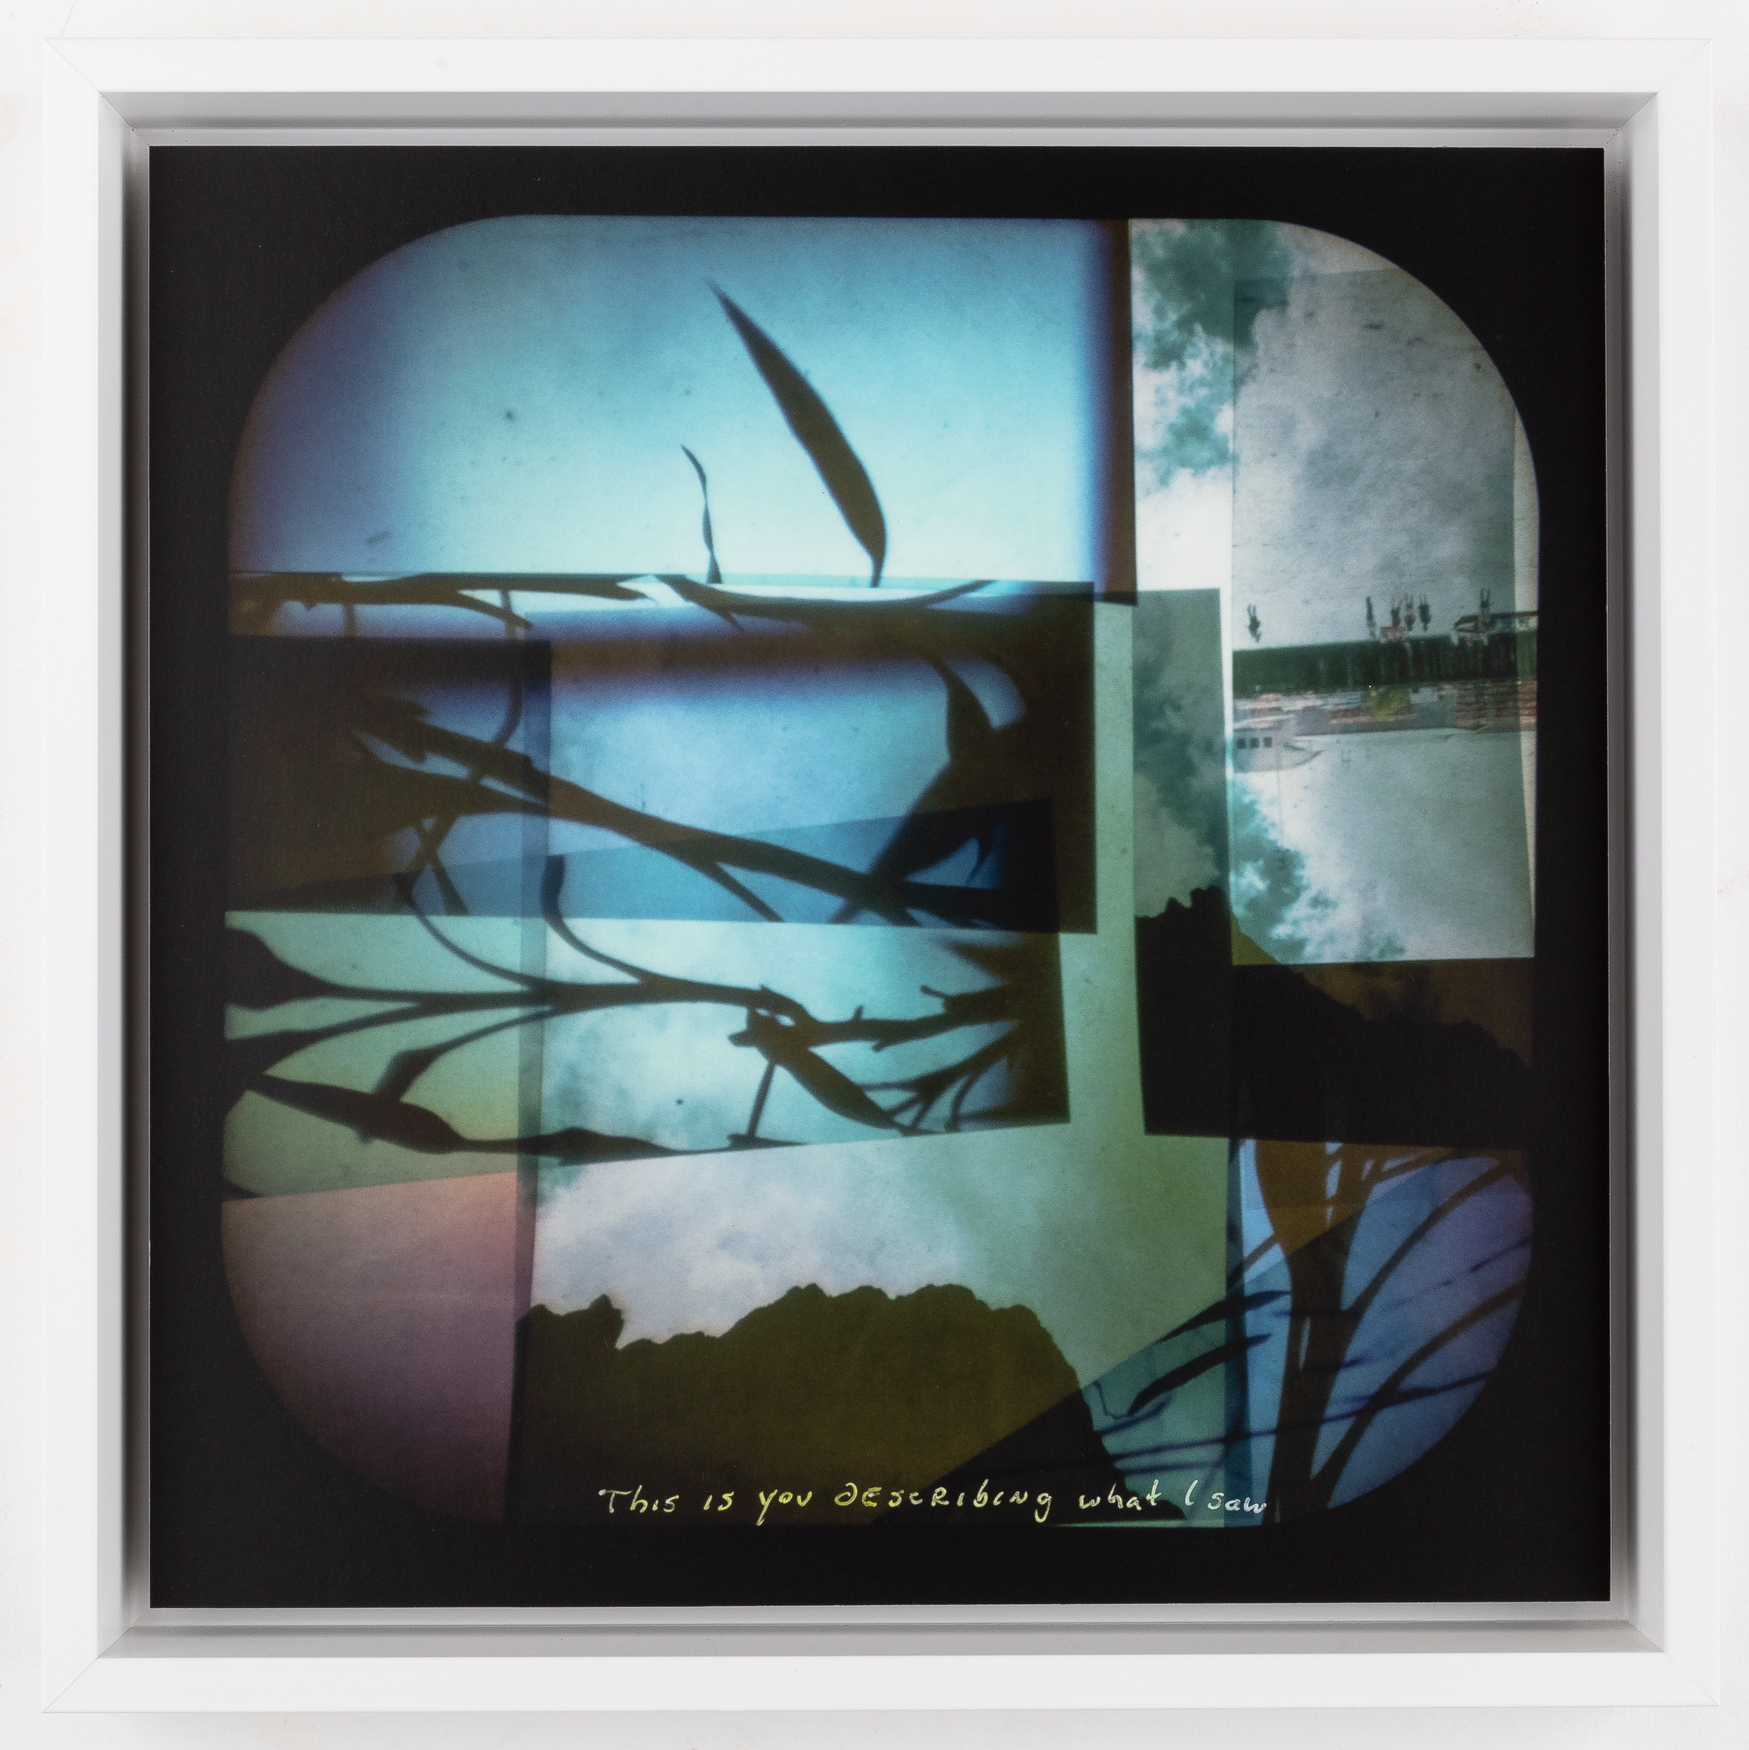 Sky Hopinka This is you describing what I saw, 2019 Inkjet print, etching 13 x 13 inches / 33.02 x 33.02 cm AP 1, Edition of 3, 2 APs Courtesy of the artist and The Green Gallery, Milwaukee © Sky Hopinka